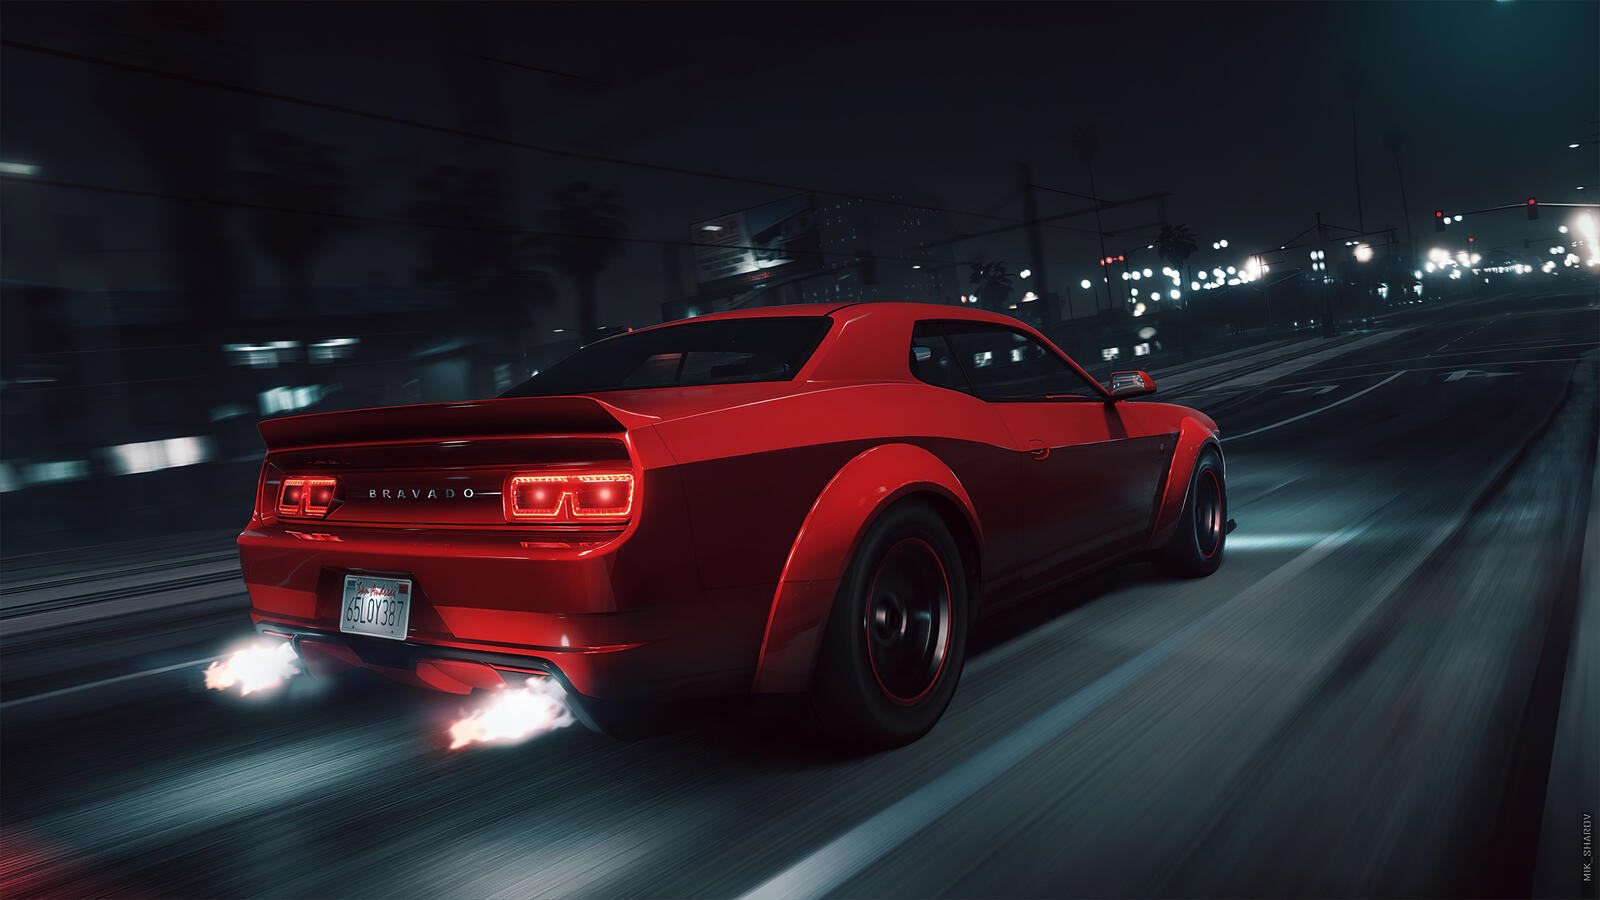 Free photo A rendering of a picture of a red Dodge Challenger at night